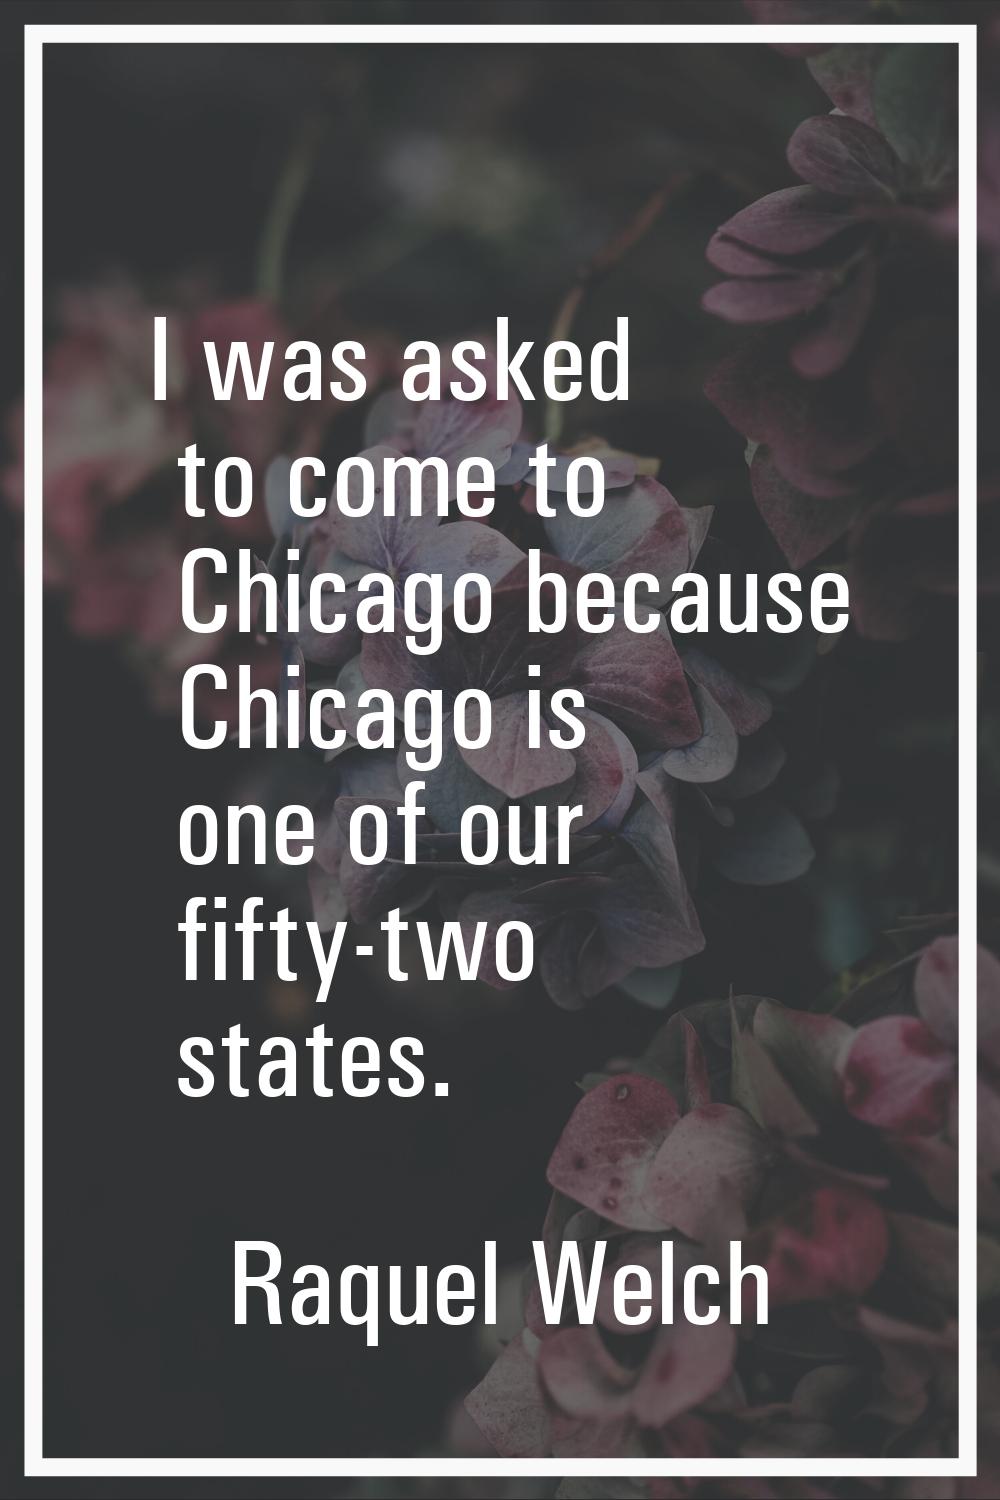 I was asked to come to Chicago because Chicago is one of our fifty-two states.